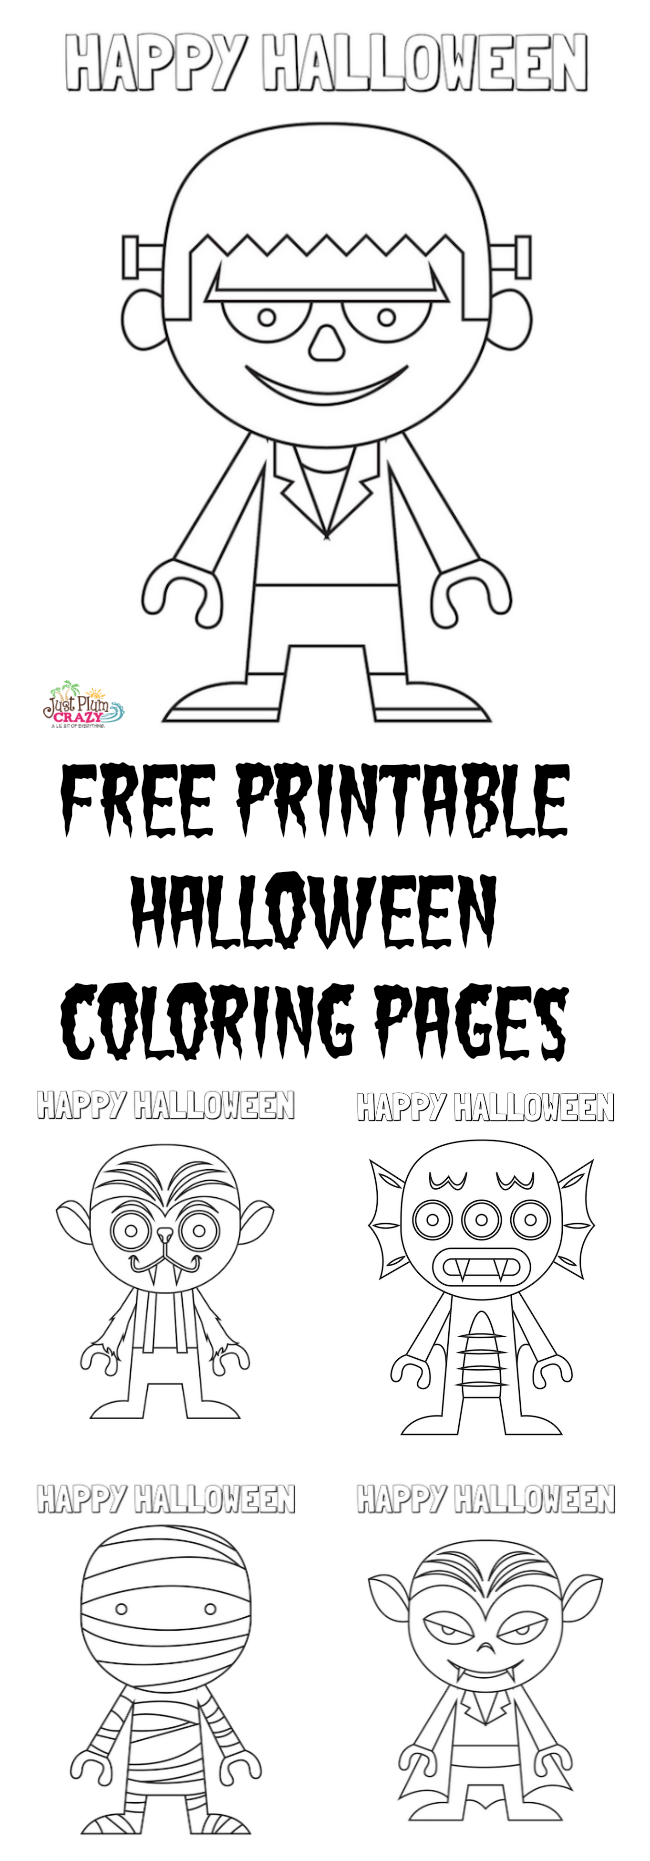 We created the Halloween Coloring Pages Free Printable to give the kids an option for the Halloween holiday.